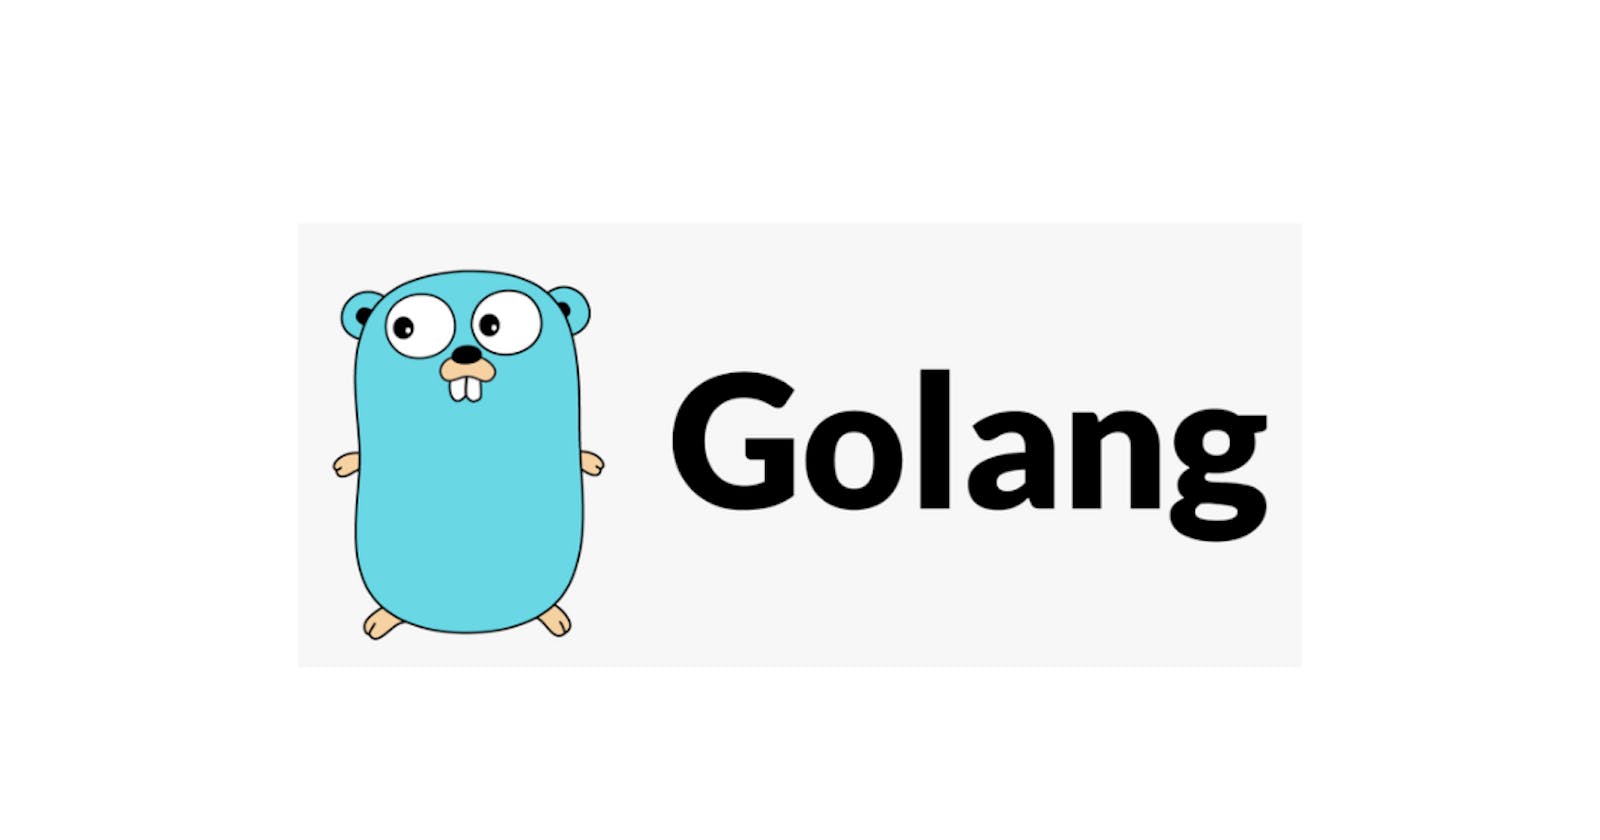 Getting Started with Backend Development in Go: A Beginner's Guide